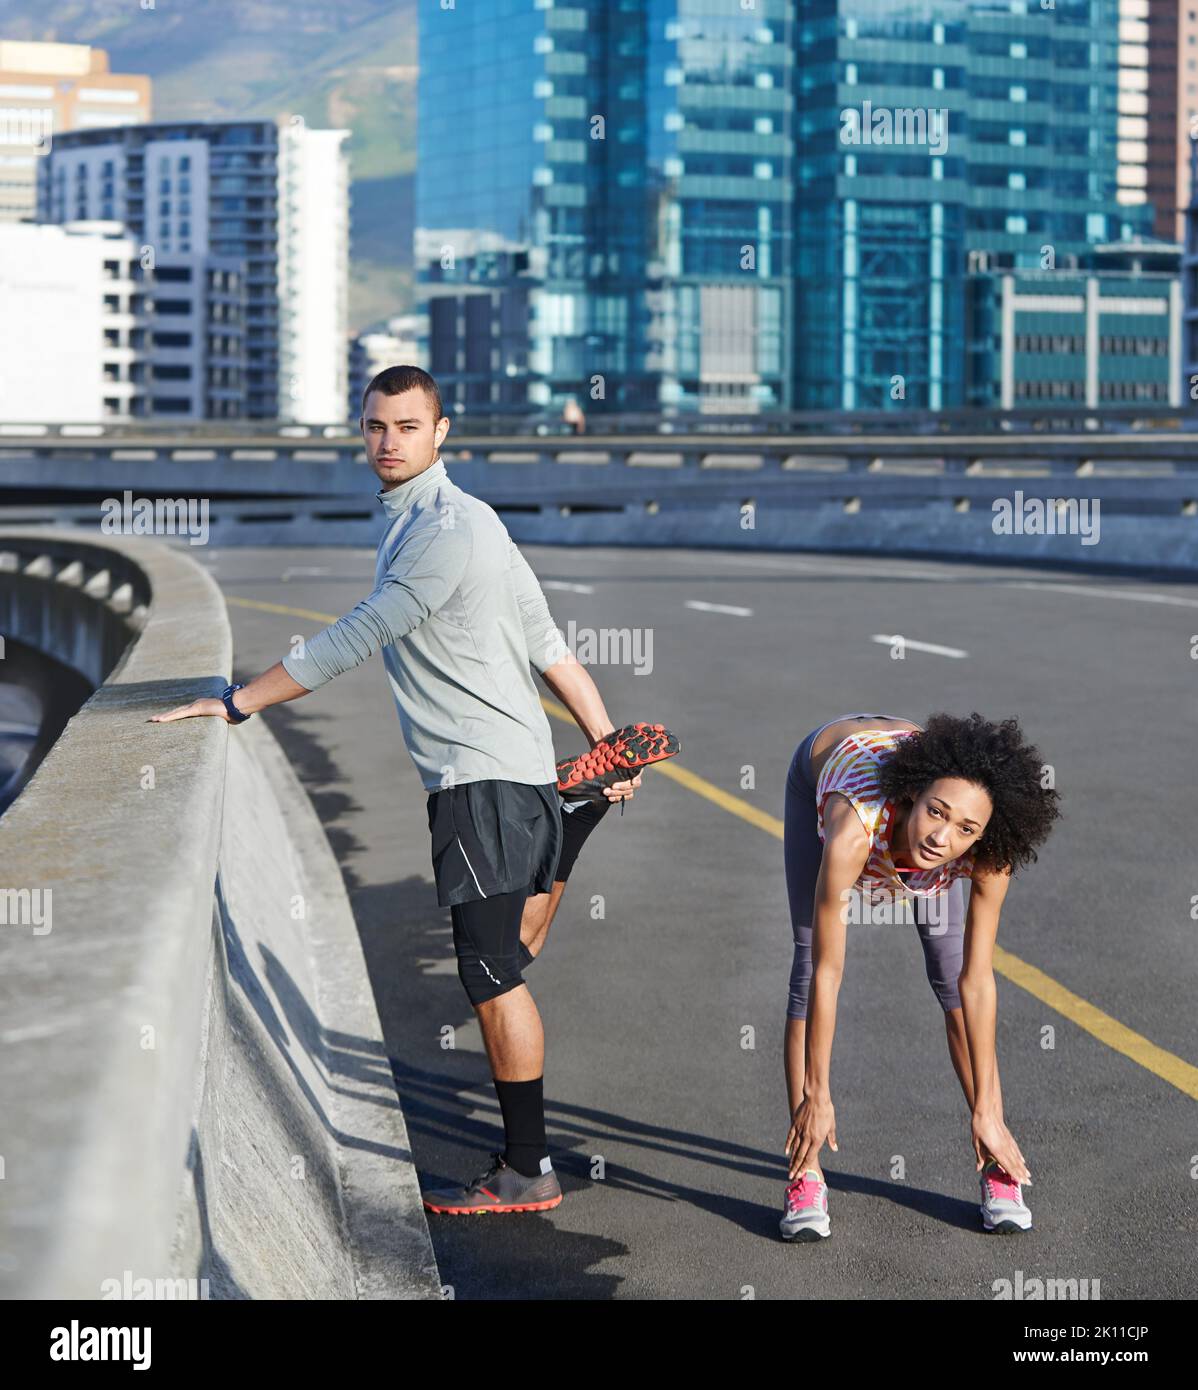 Running is always better with a partner. Portrait of two friends stretching together before a run through the city streets. Stock Photo